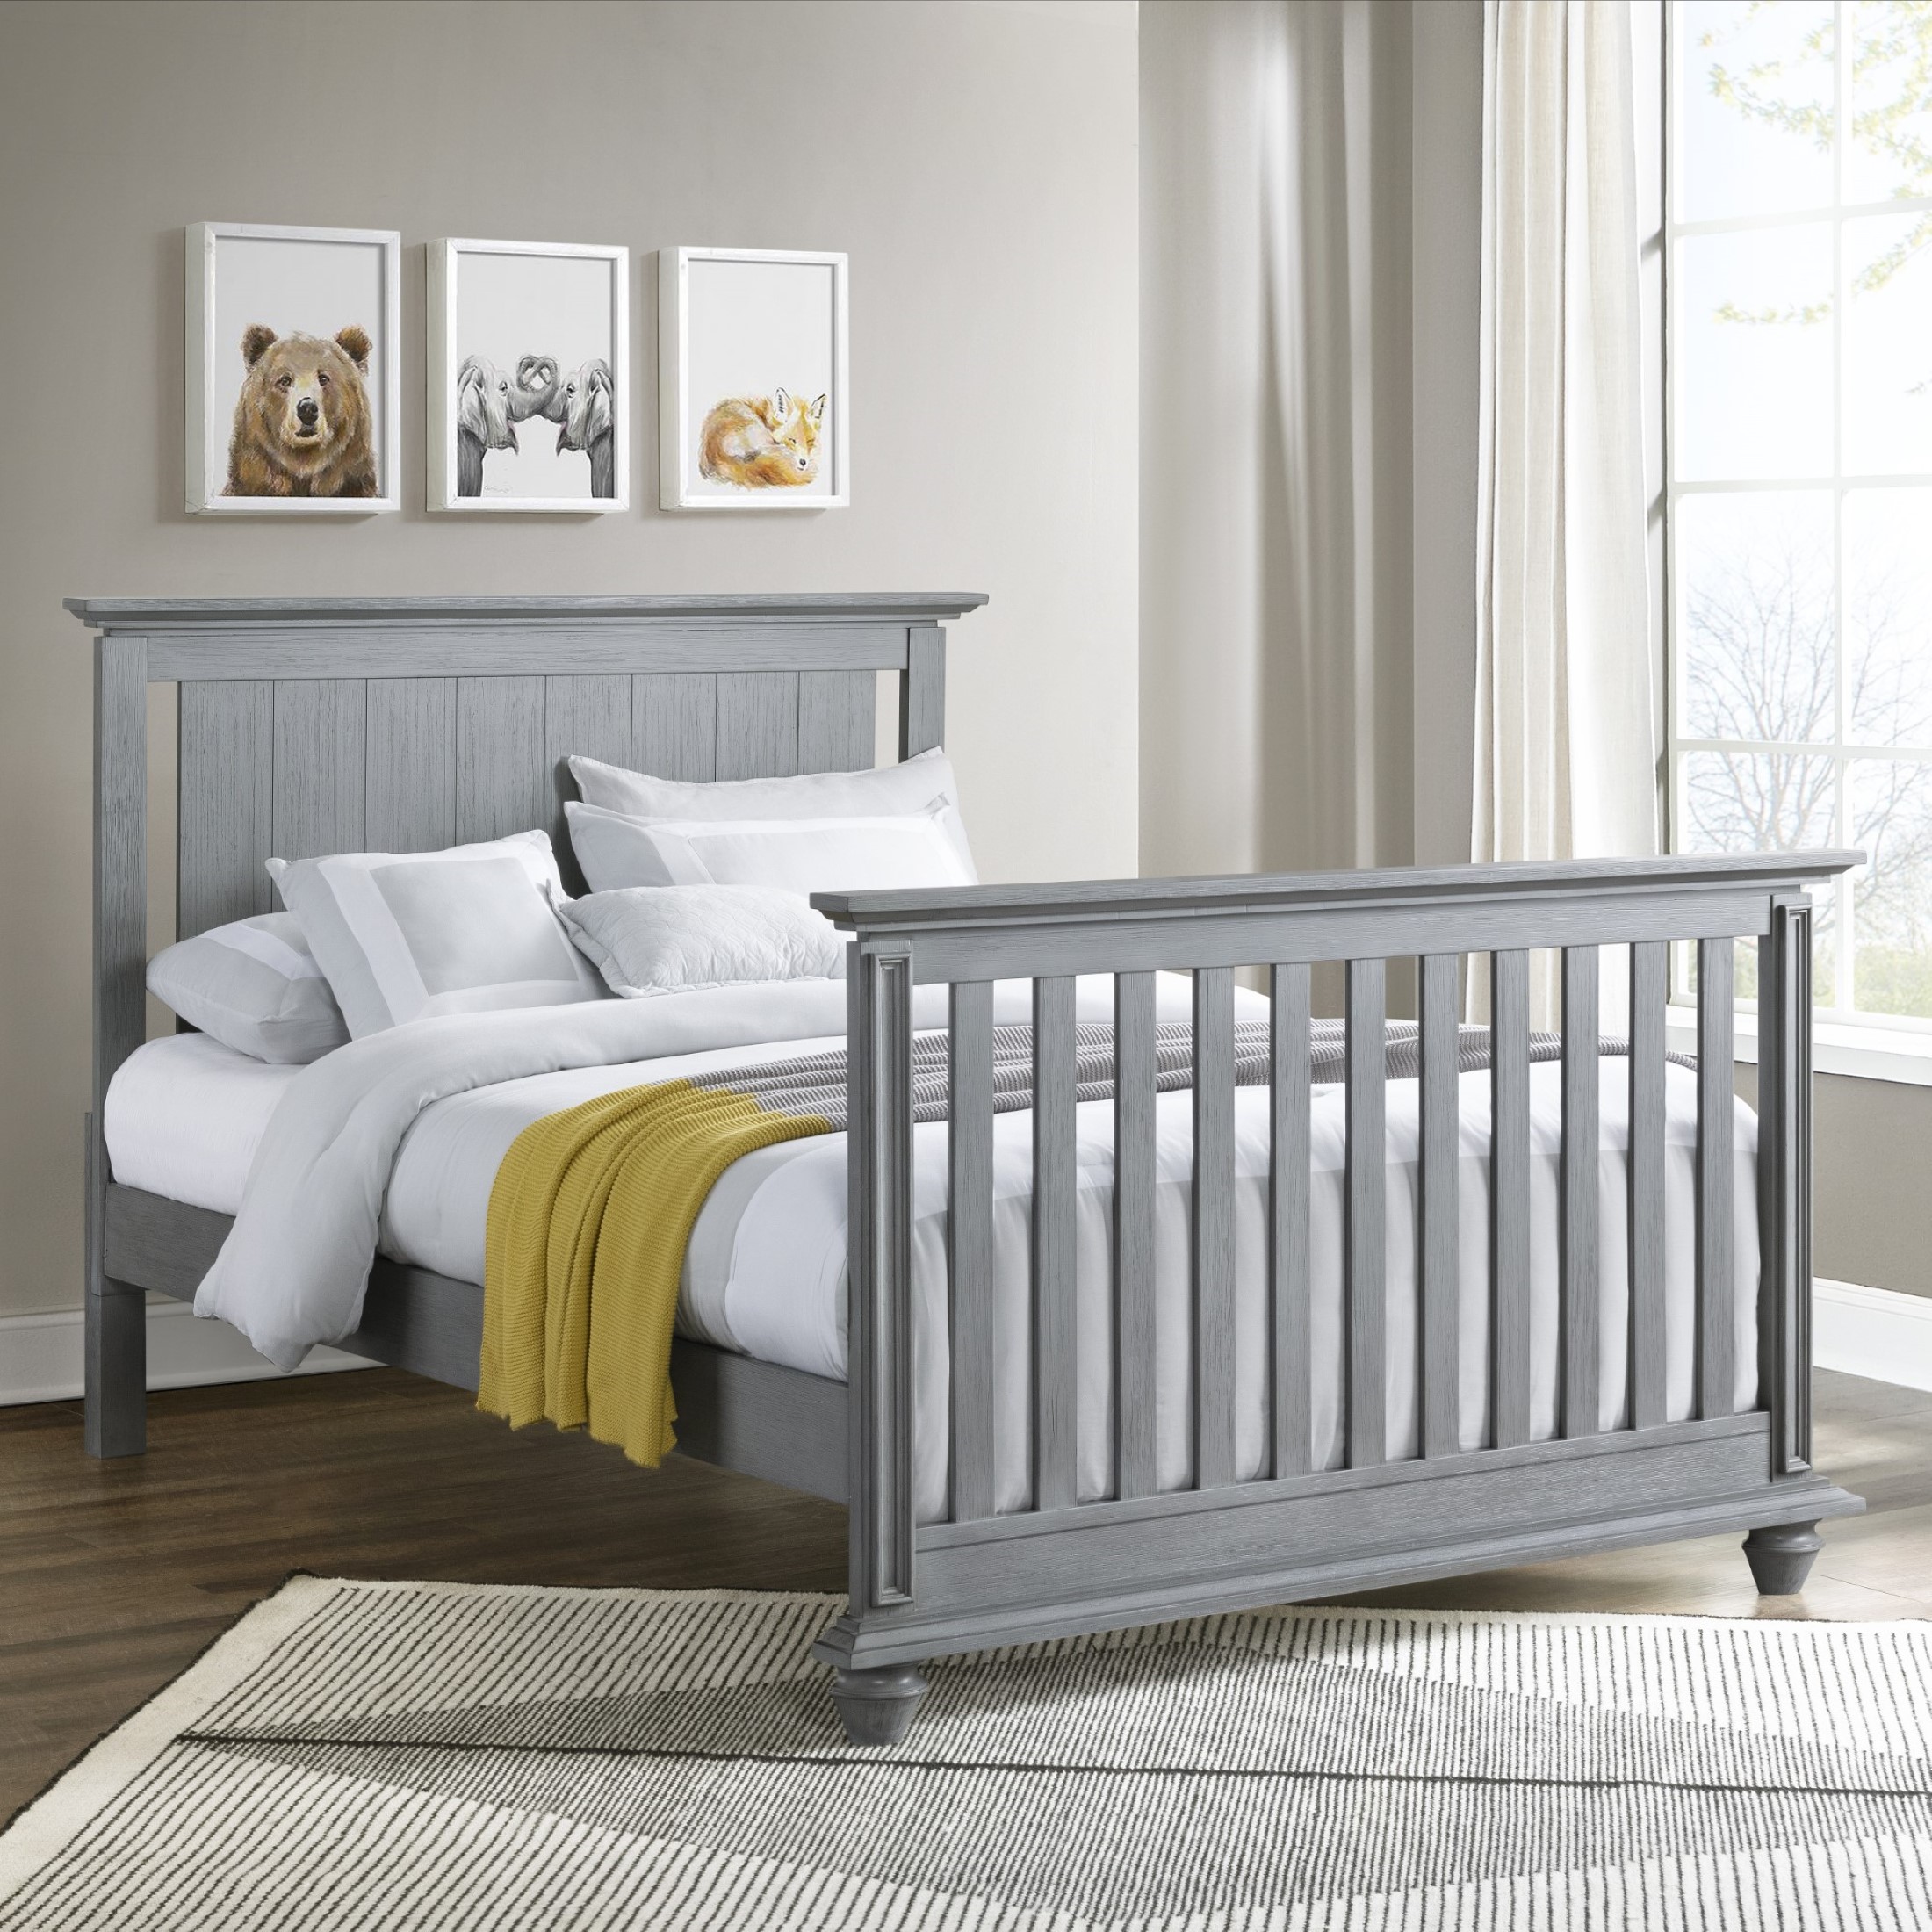 Oxford Baby Langston 4-in-1 Convertible Crib, Graphite Gray, Wooden Crib - image 2 of 11